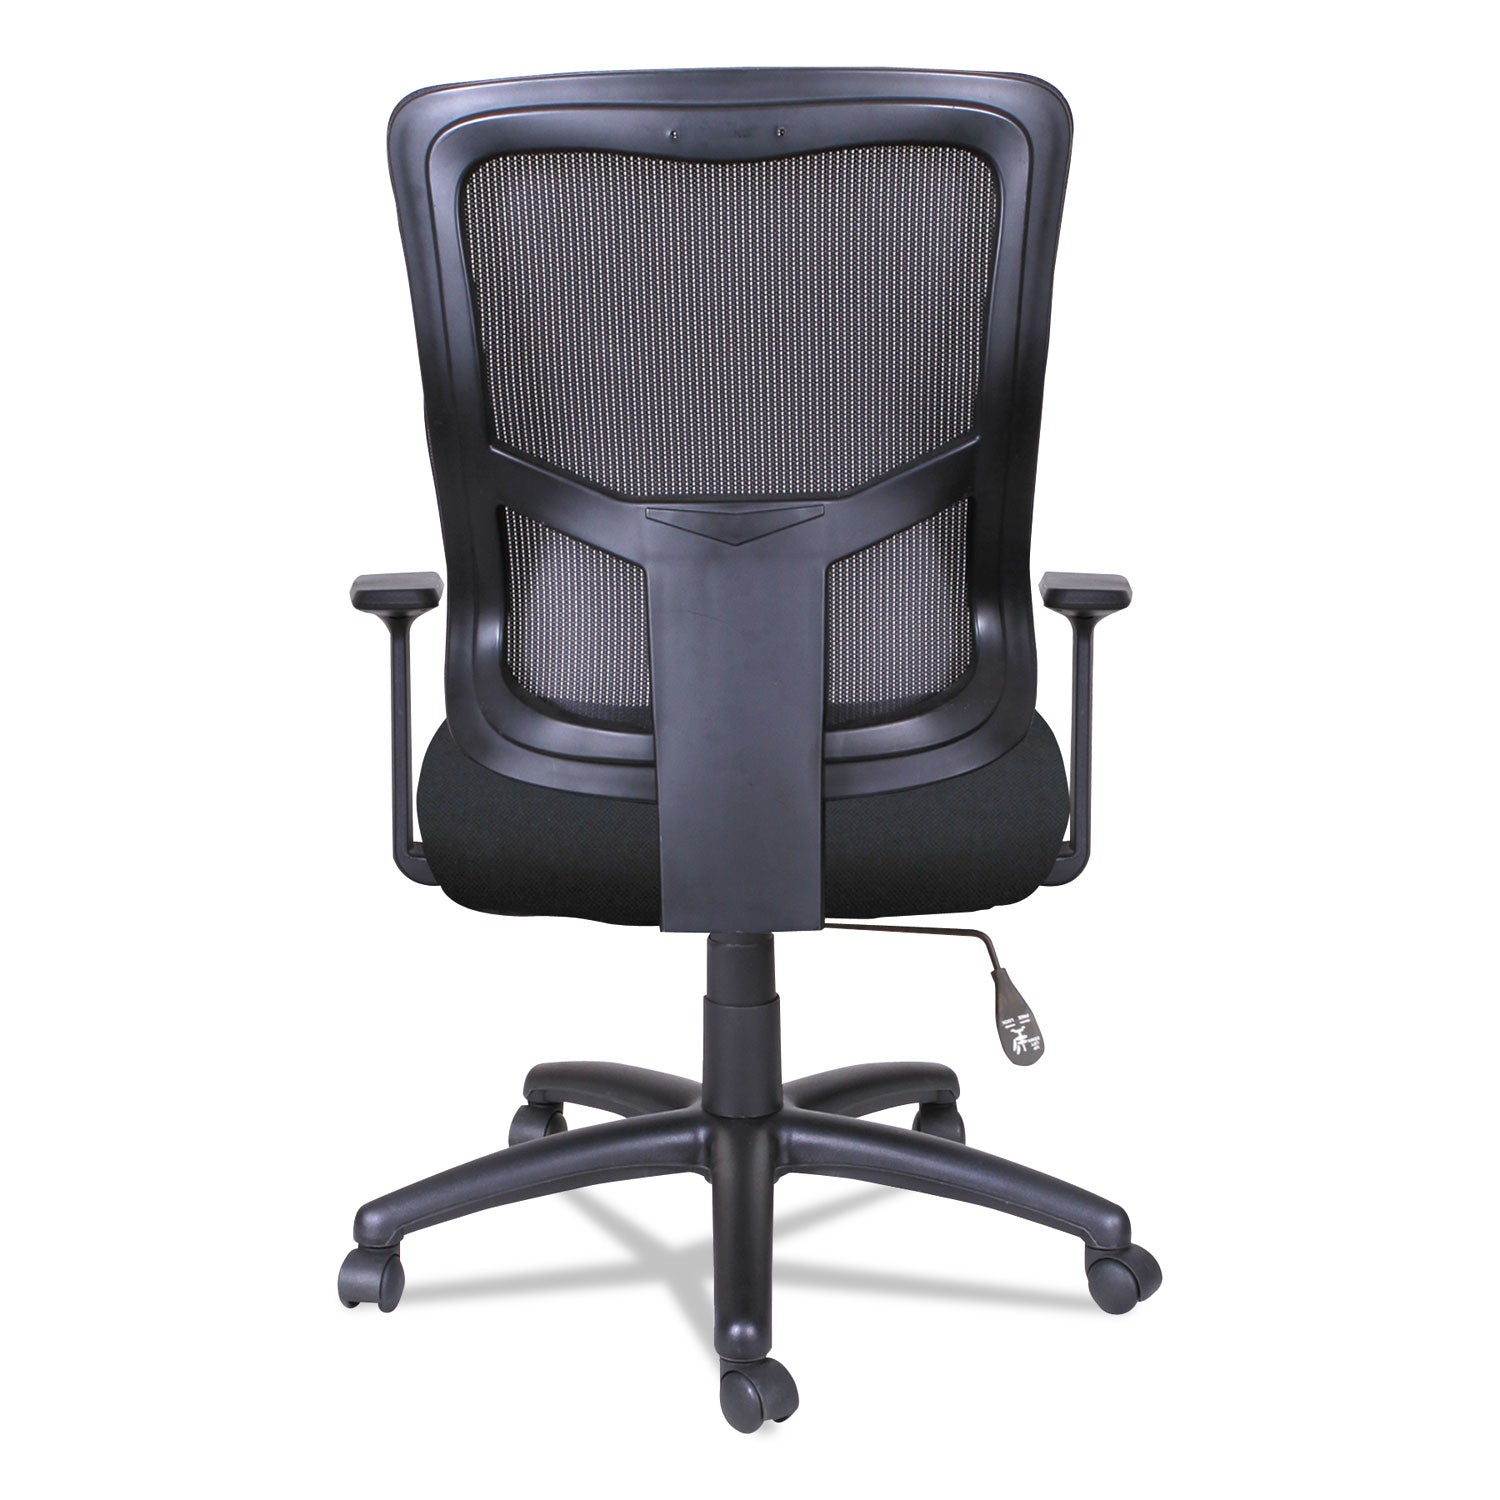 alera-elusion-ii-series-mesh-mid-back-swivel-tilt-chair-supports-up-to-275-lb-1811-to-2177-seat-height-black_aleelt4214b - 4